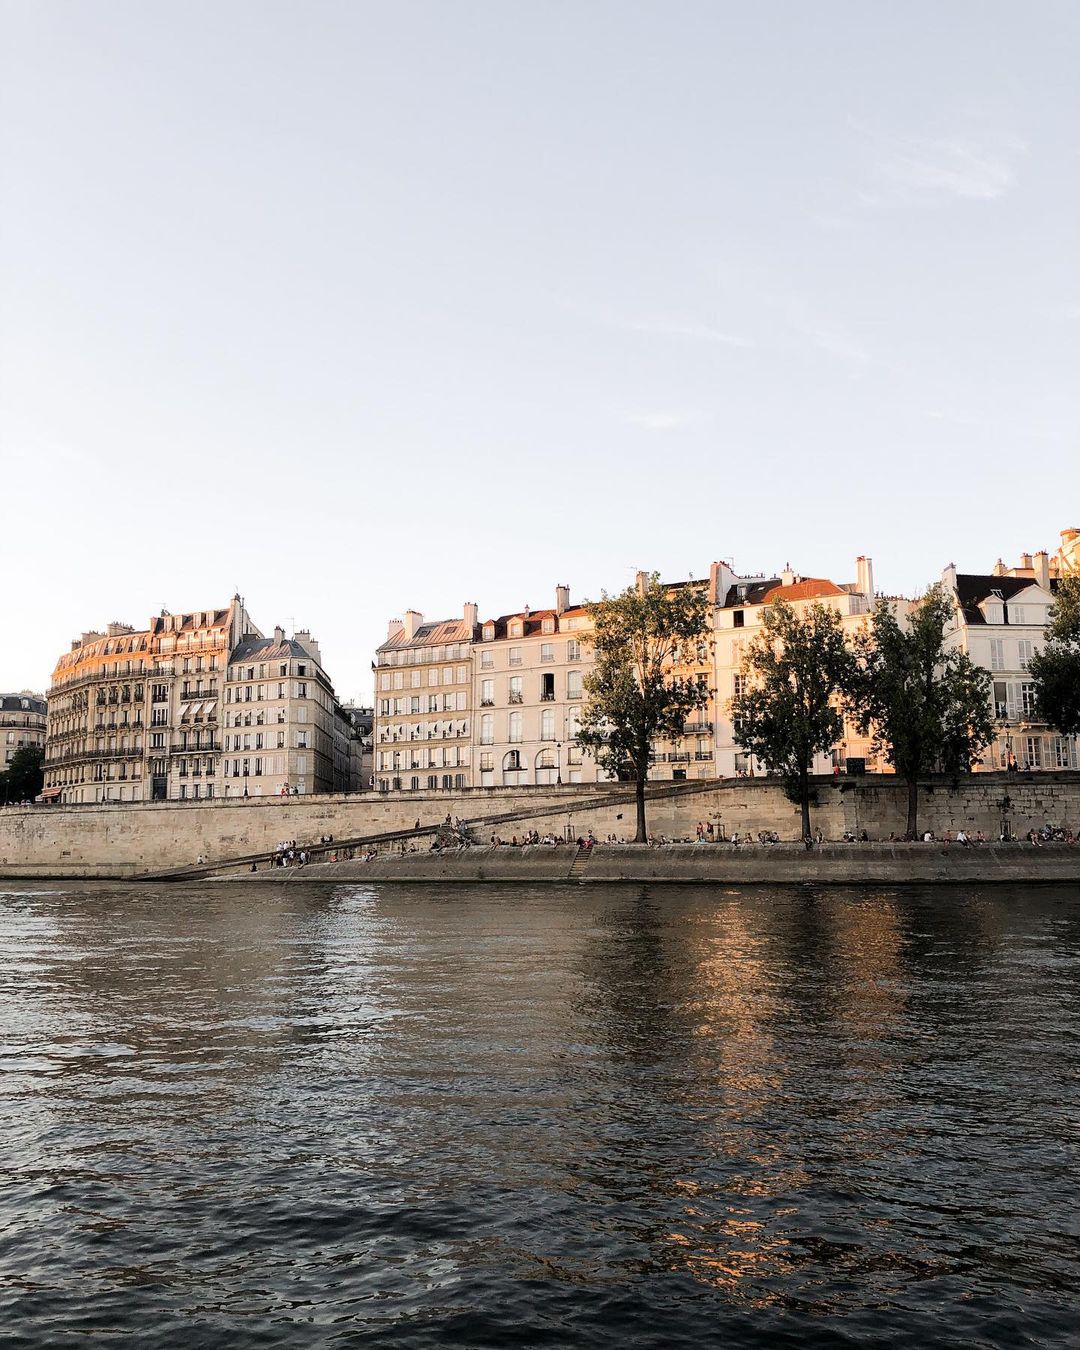 A Golden Hour view of the architecture along the Seine